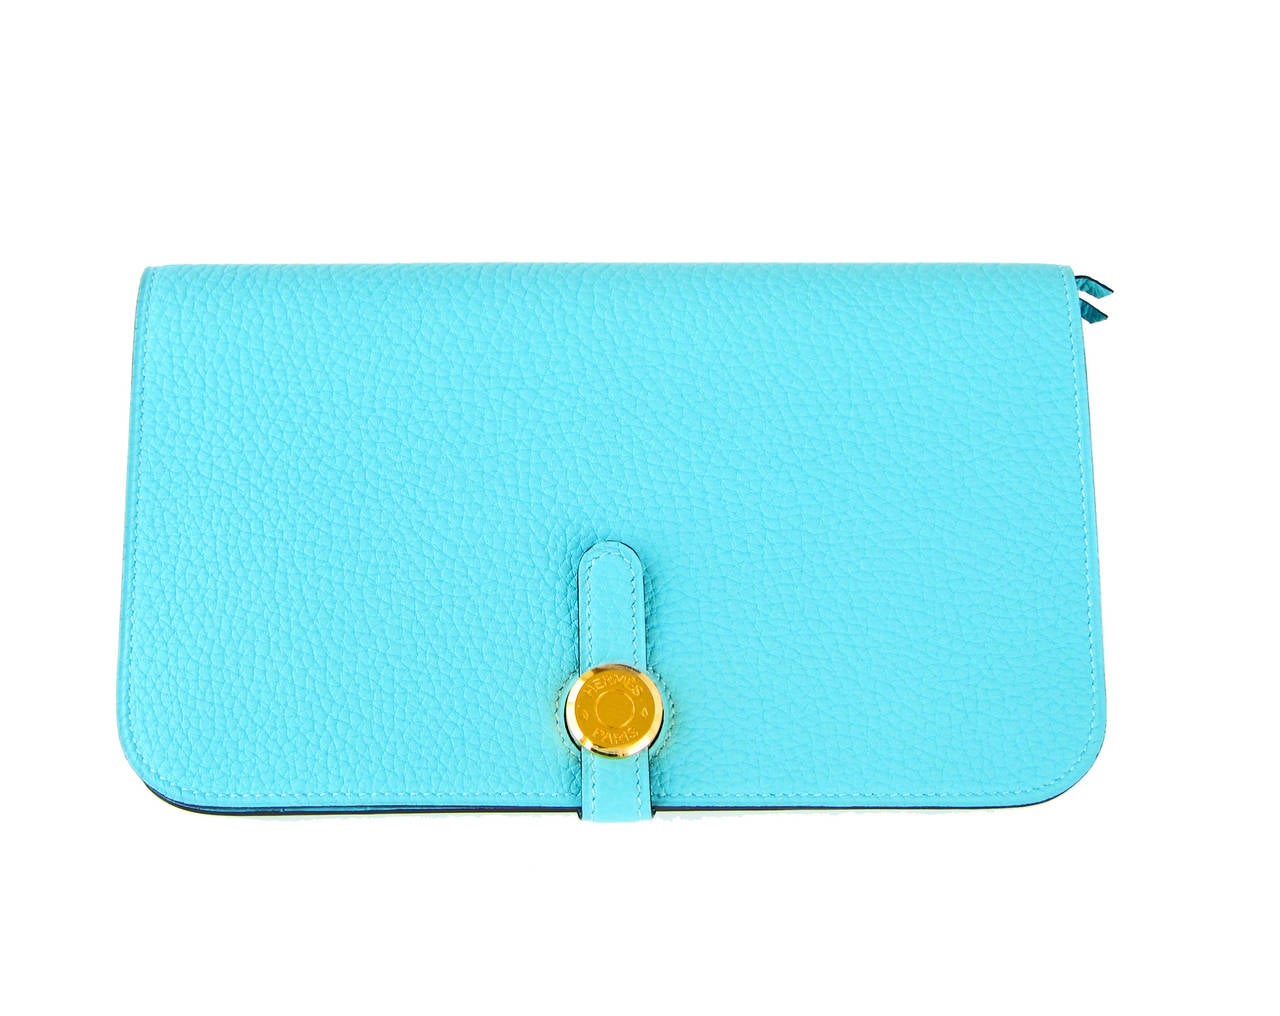 Hermes Blue Atoll Gold Hardware Togo Dogon Duo Leather Wallet Clutch Bag Amaze 3